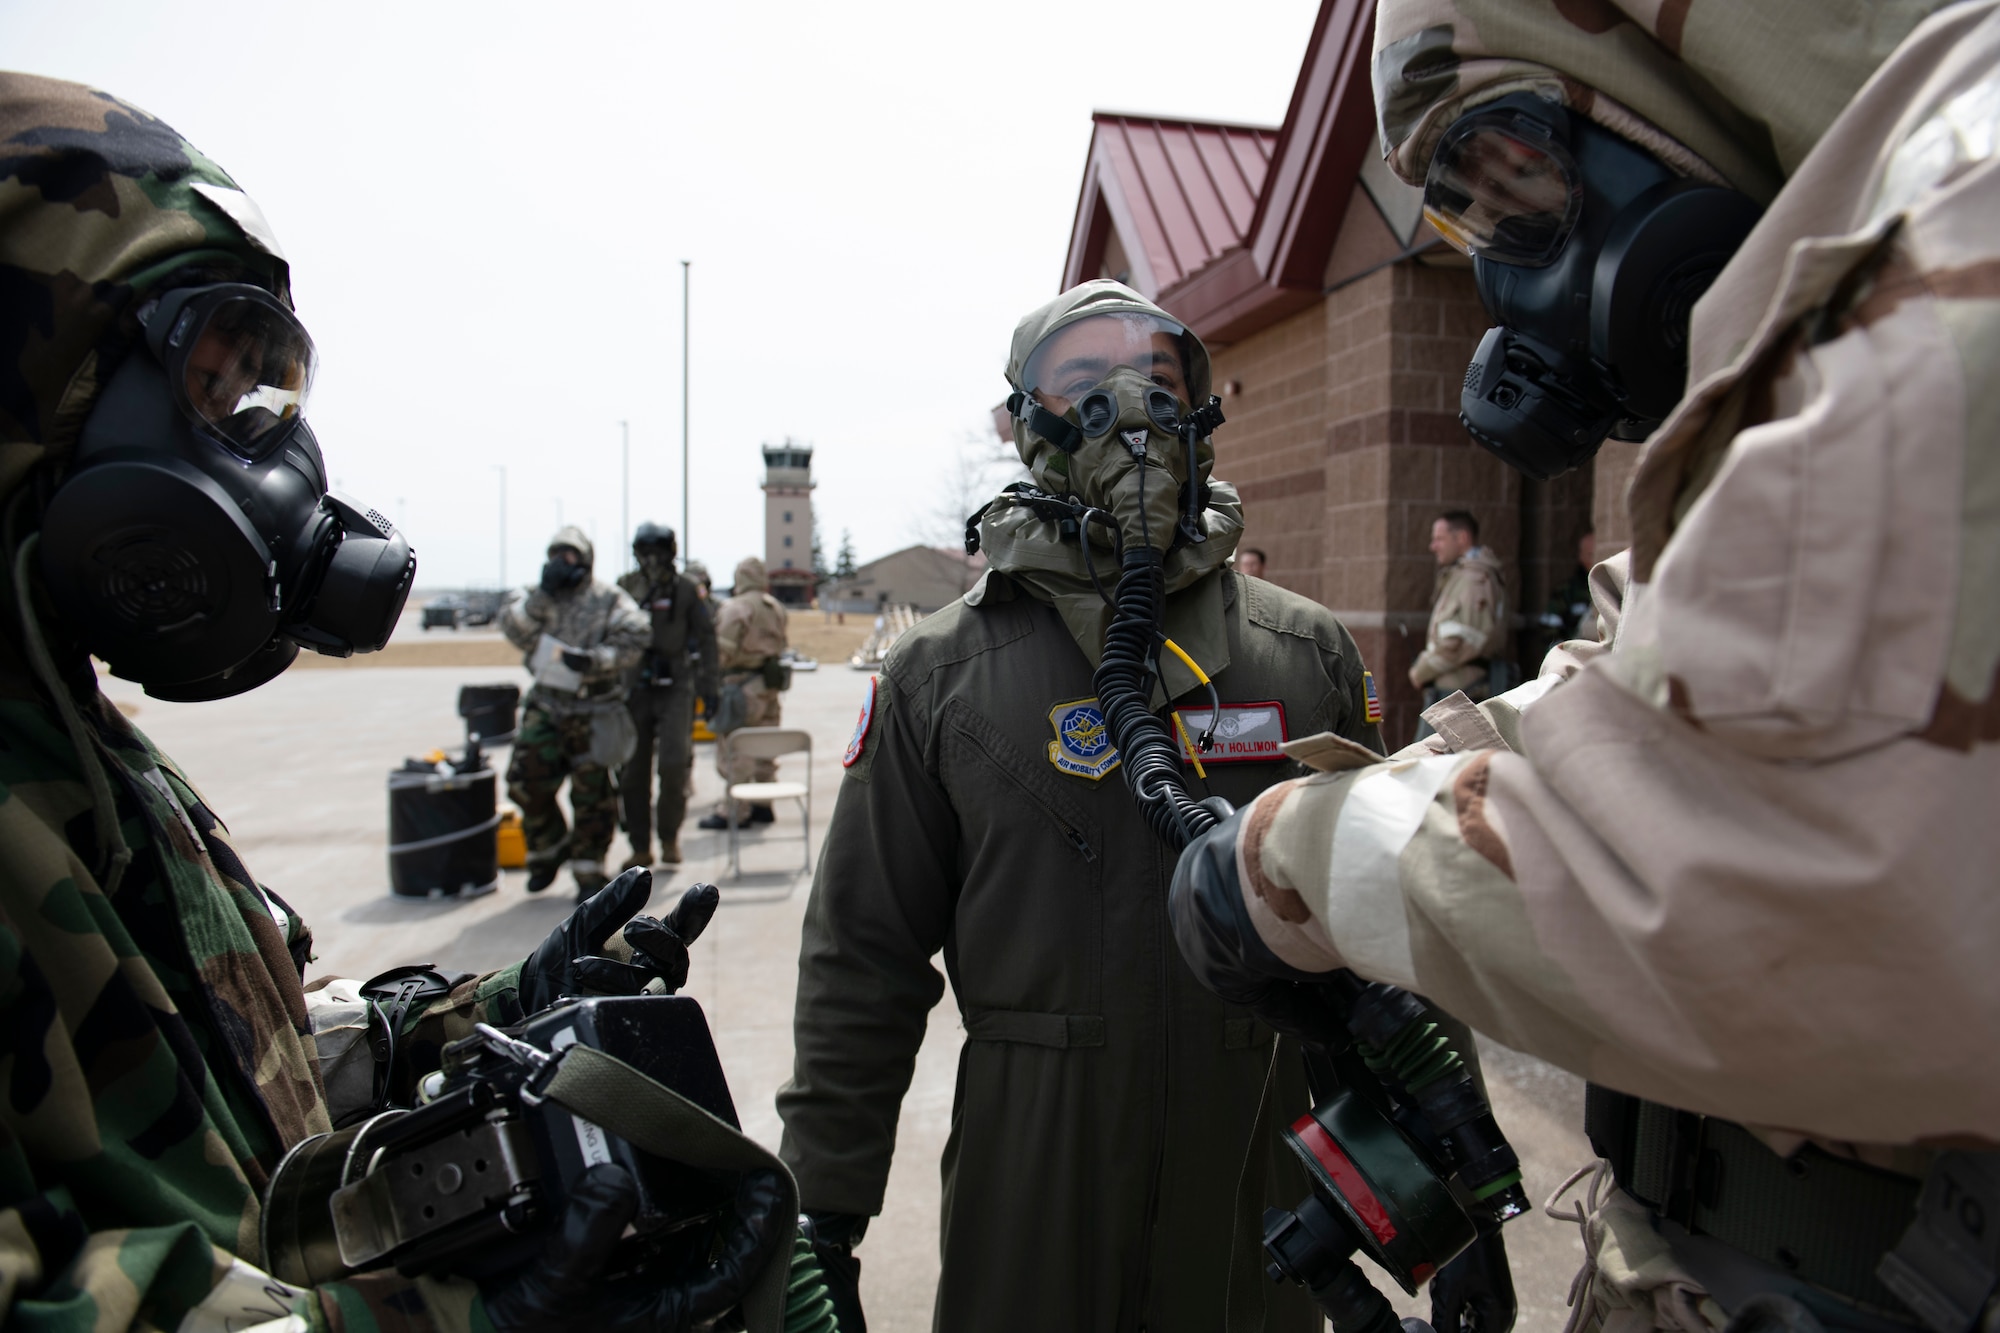 U.S. Airmen assigned to the 60th Air Mobility Wing, Travis Air Force Base, California, simulate the decontamination process through an aircrew contamination control area through after their arrival at the Alpena Combat Readiness Training Center, Alpena, Michigan, April 12, 2022. In the foreground, two Airmen are decontaminating an aircrew member. In the background, aircrew members are being processed.